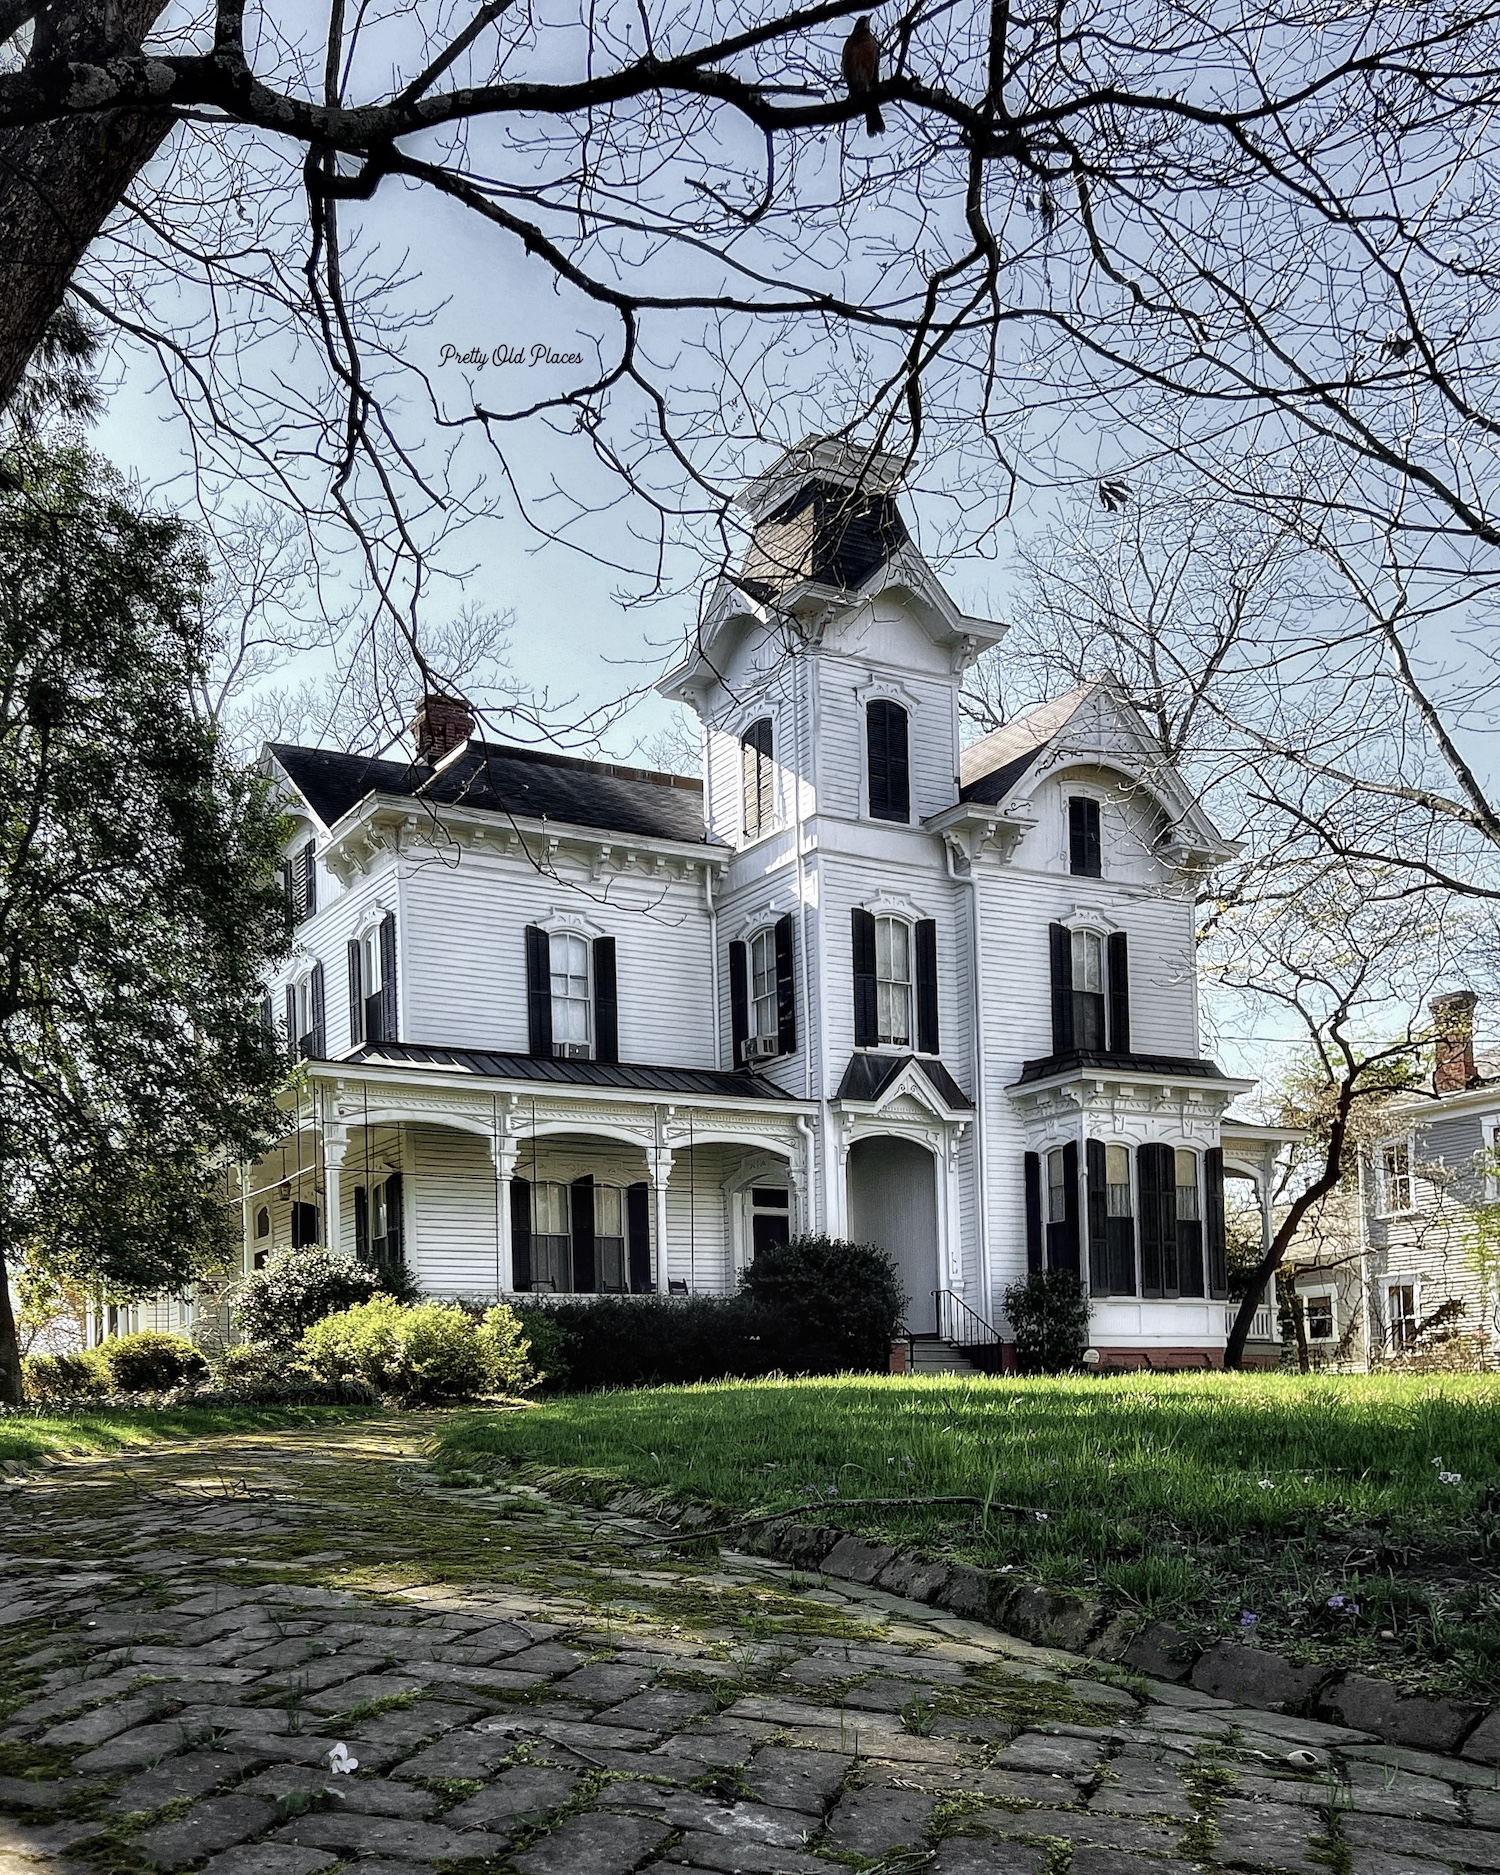 Brumby-Sibley-Corley House